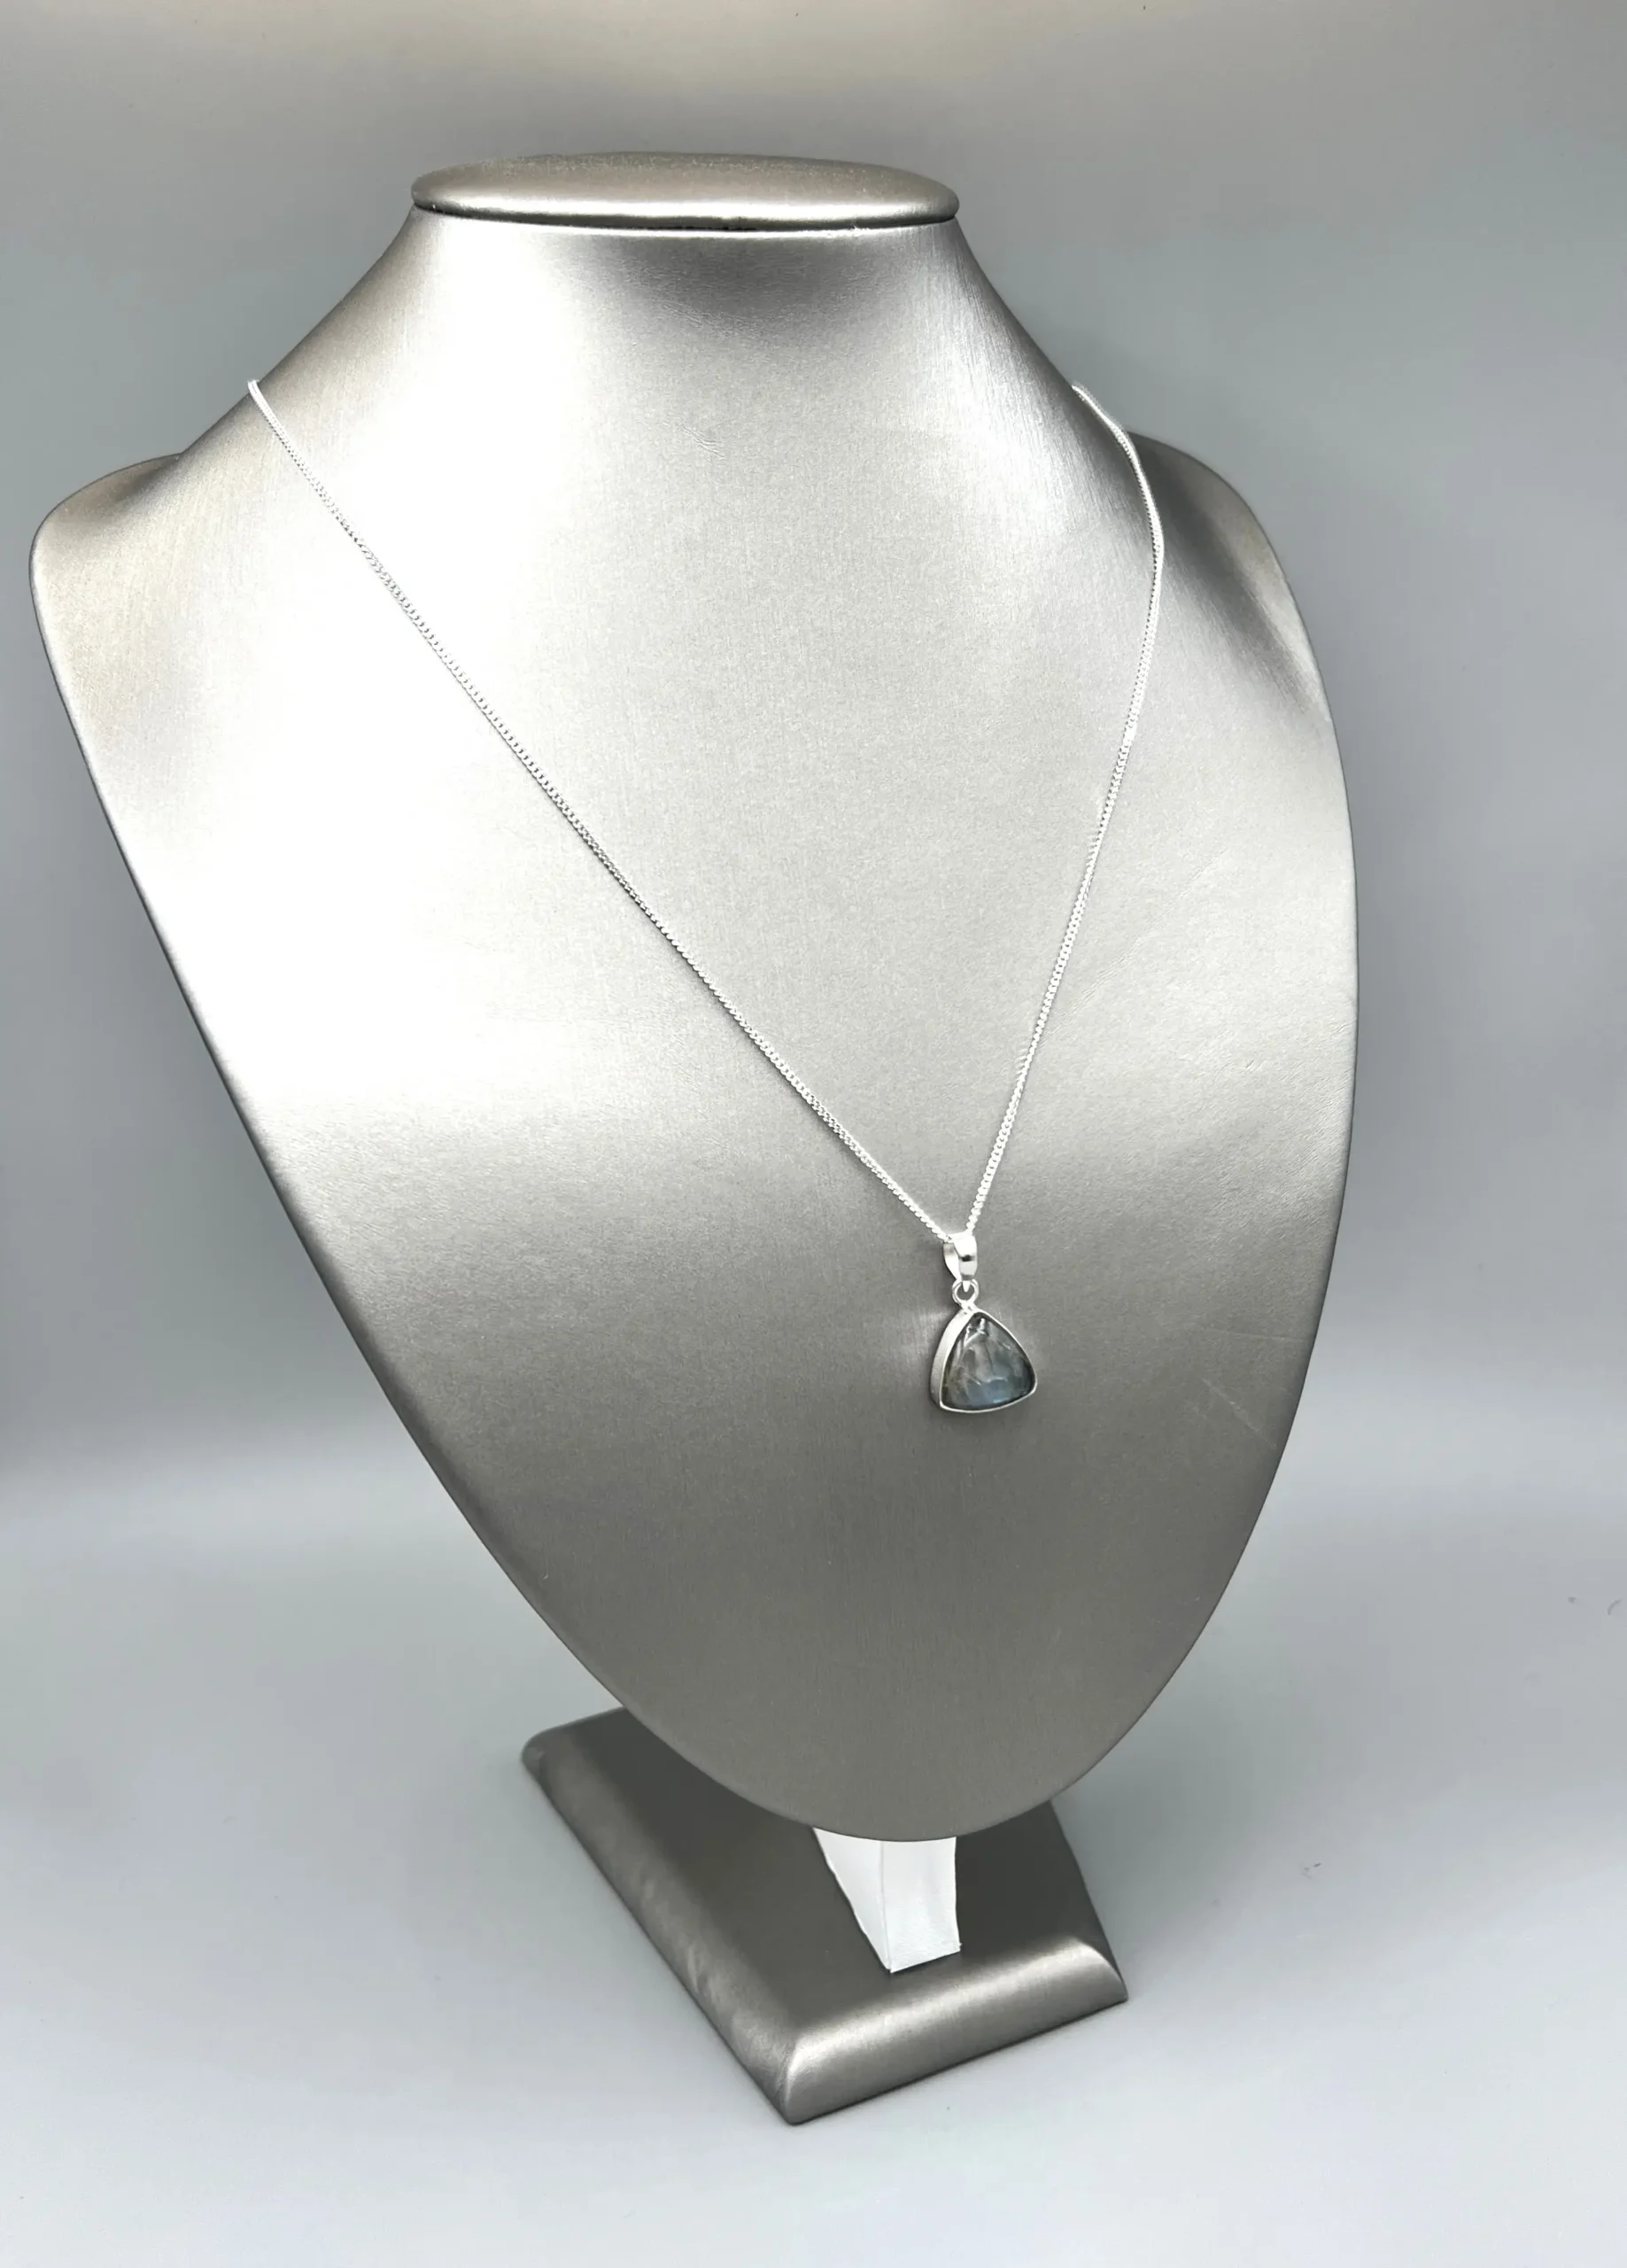 Silver necklace with peacock stone